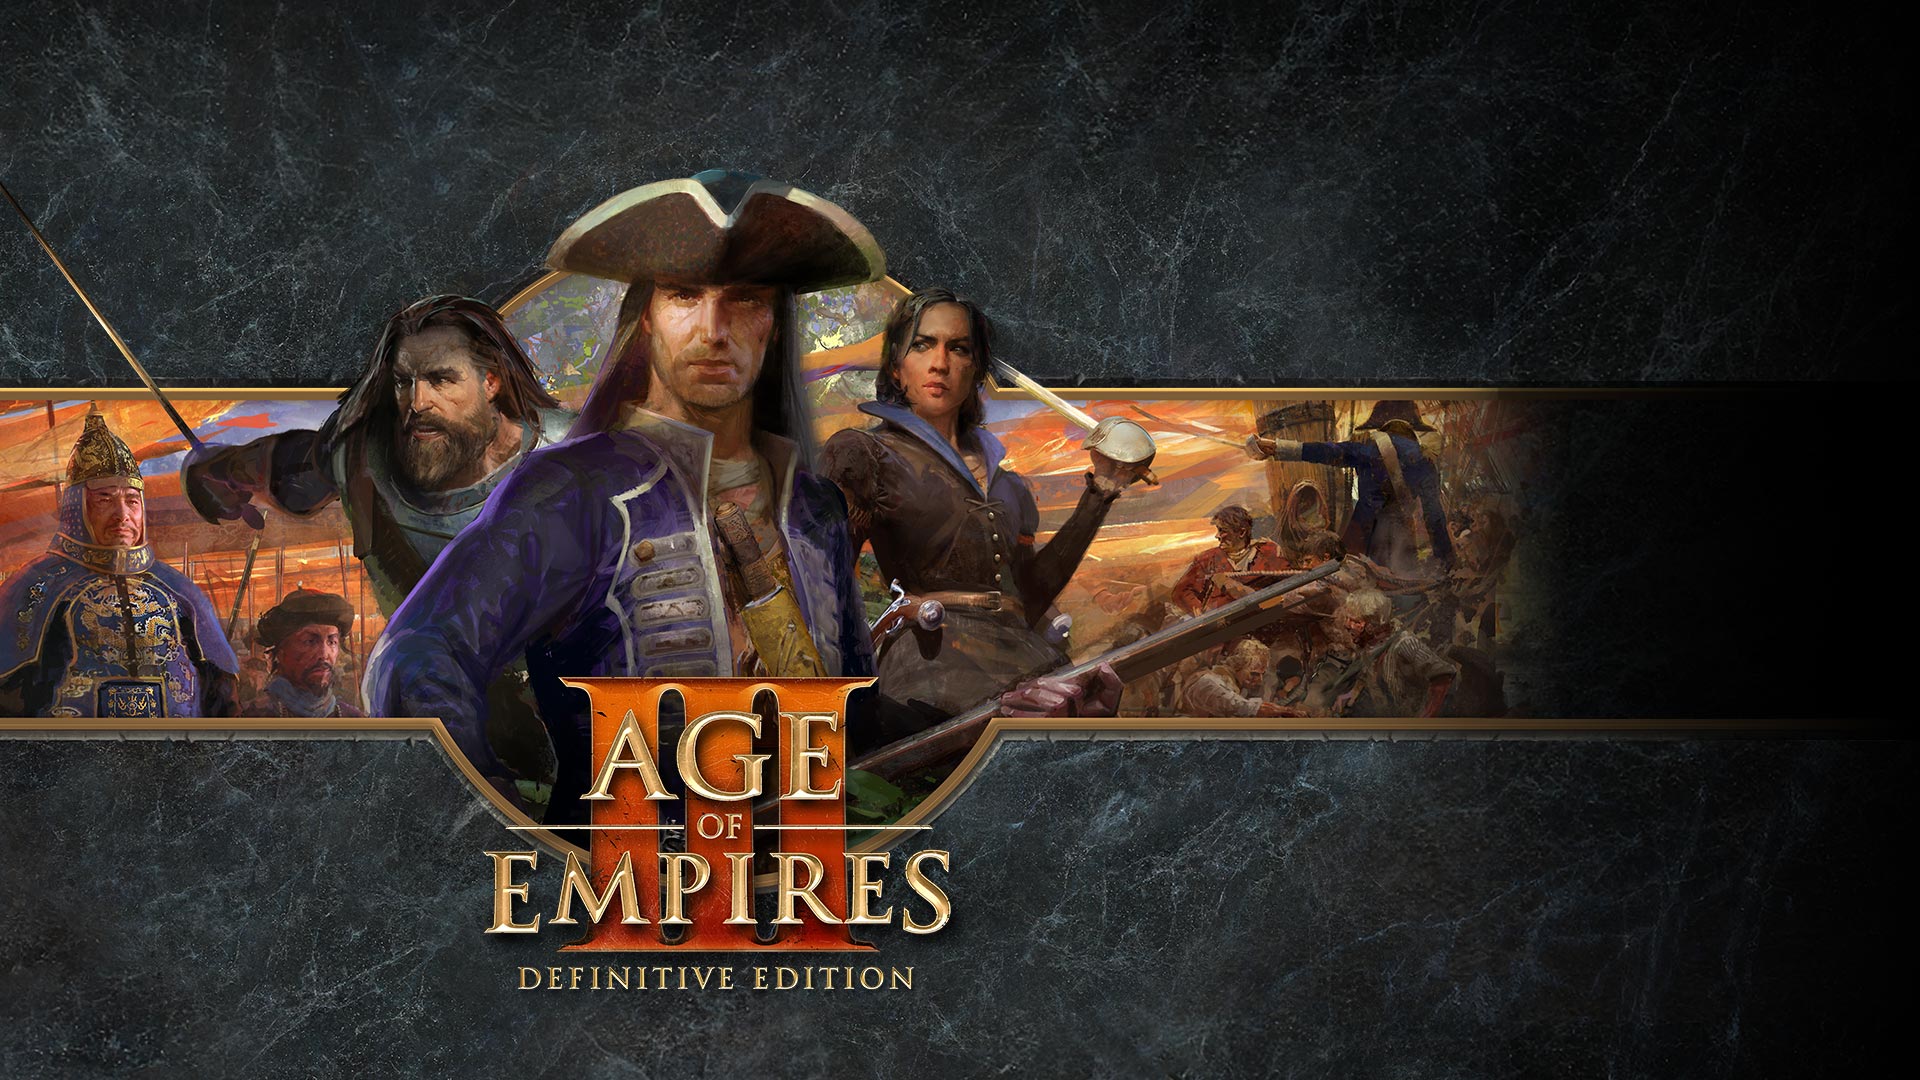 Age of Empires III: Definitive Edition, personnages prenant la pose